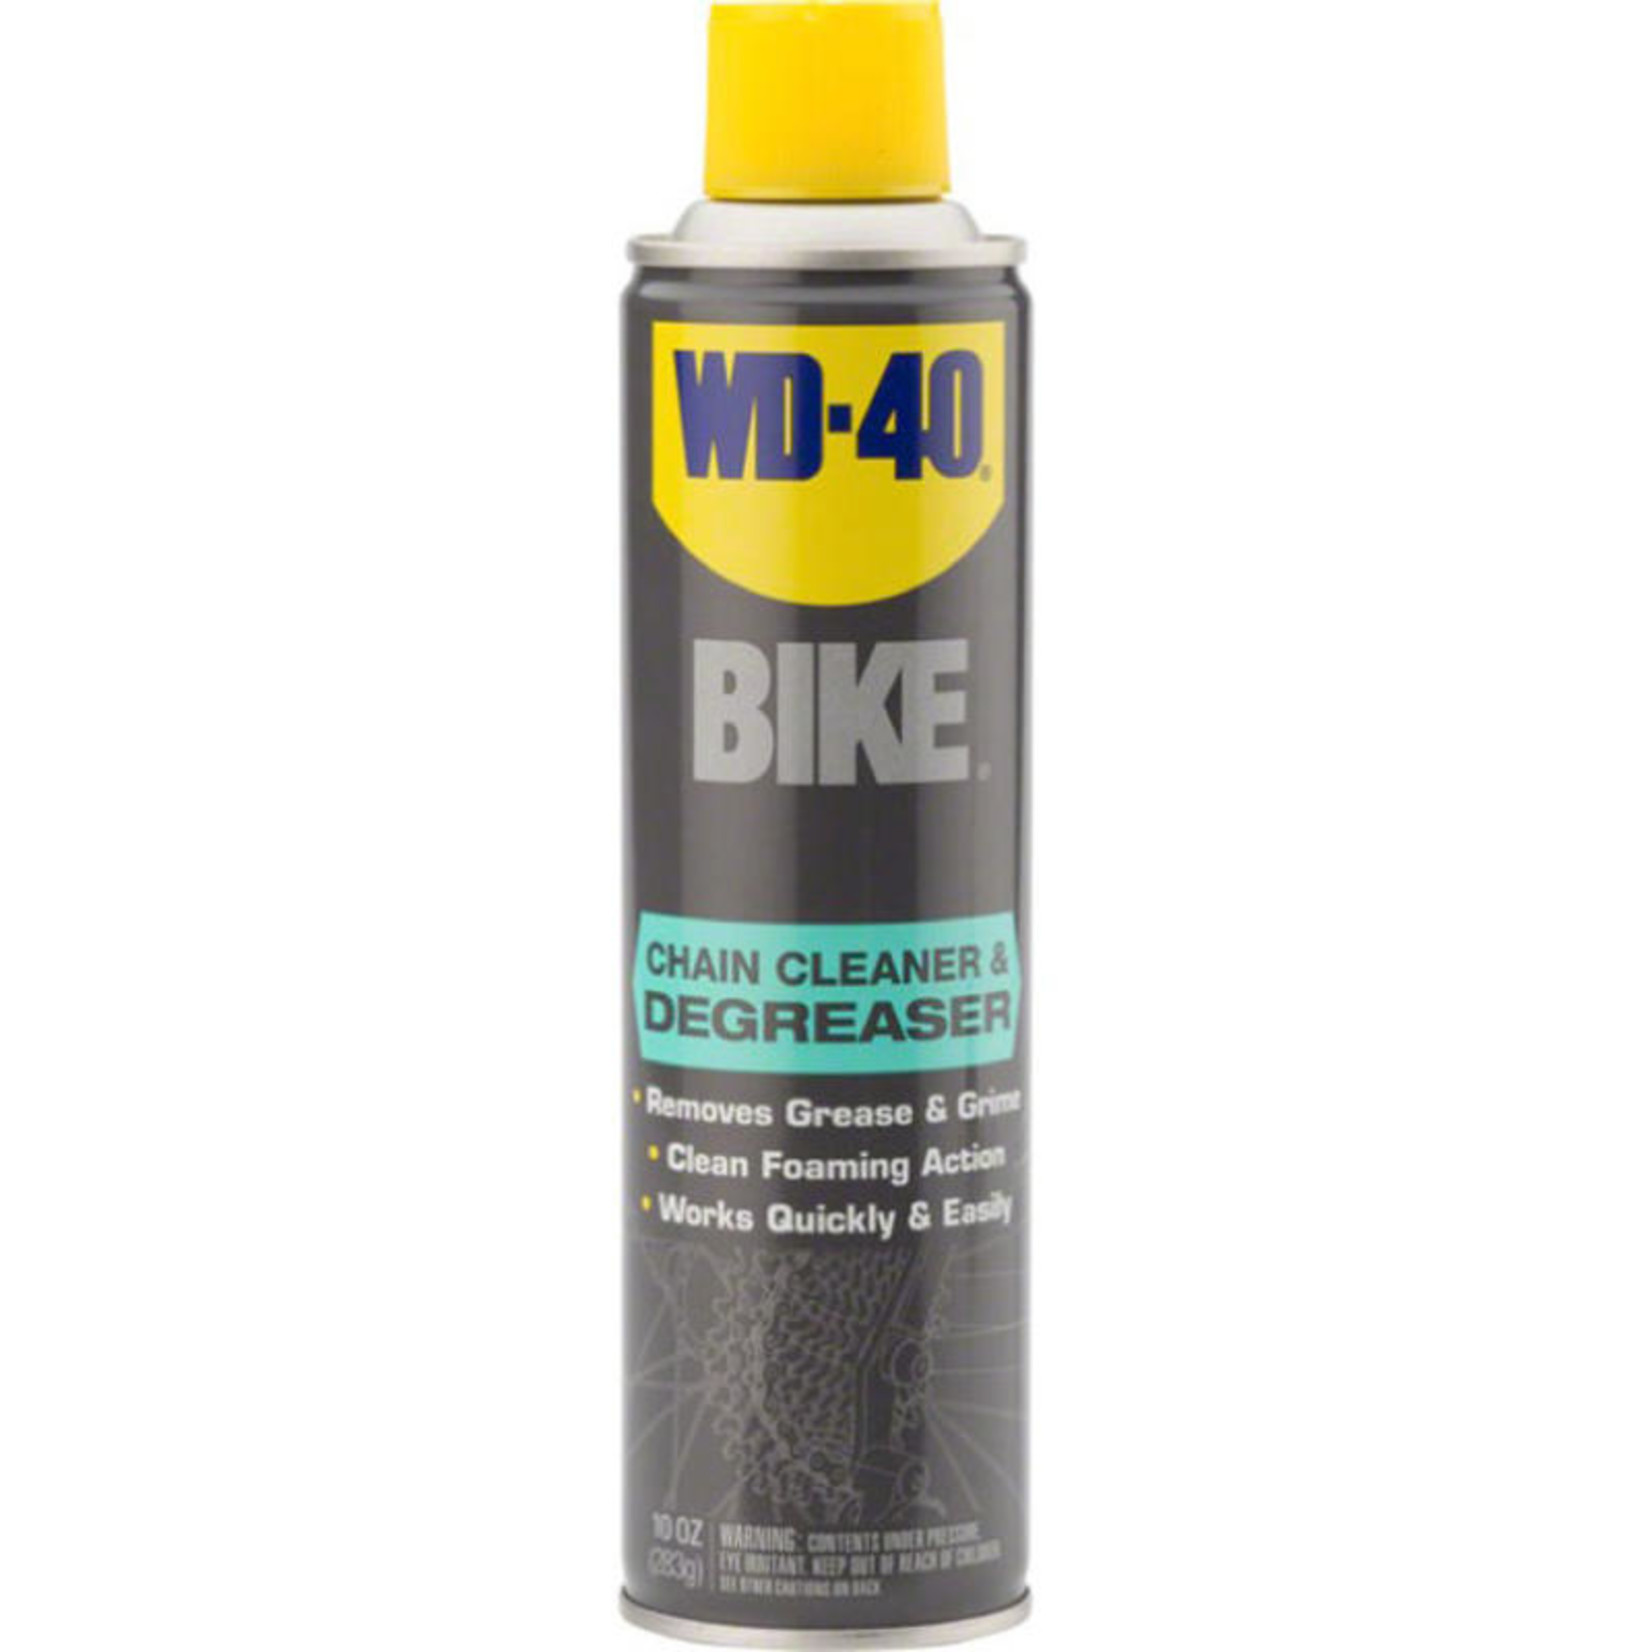 WD-40 BIKE CHAIN CLEANER AND DEGREASER